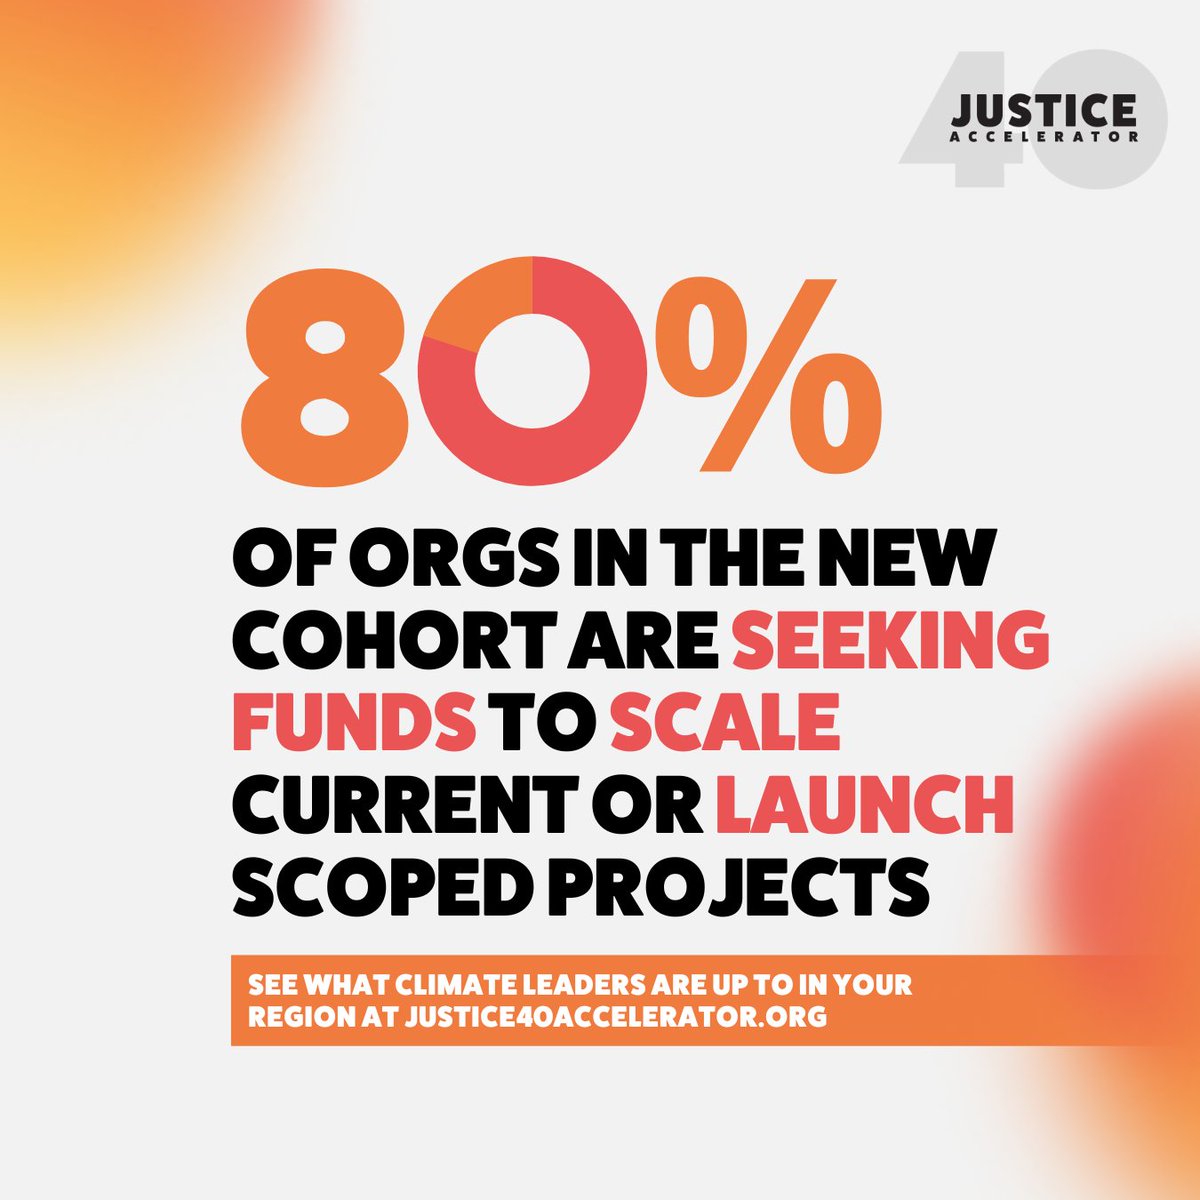 80% of the orgs in the 3rd cohort of the #Justice40Accelerator are working to scale successful or fund fully scoped climate justice initiatives. Read about their innovative work across solution areas like #CleanWater, #Energy & #WorkforceDevelopment ▶️ justice40accelerator.org